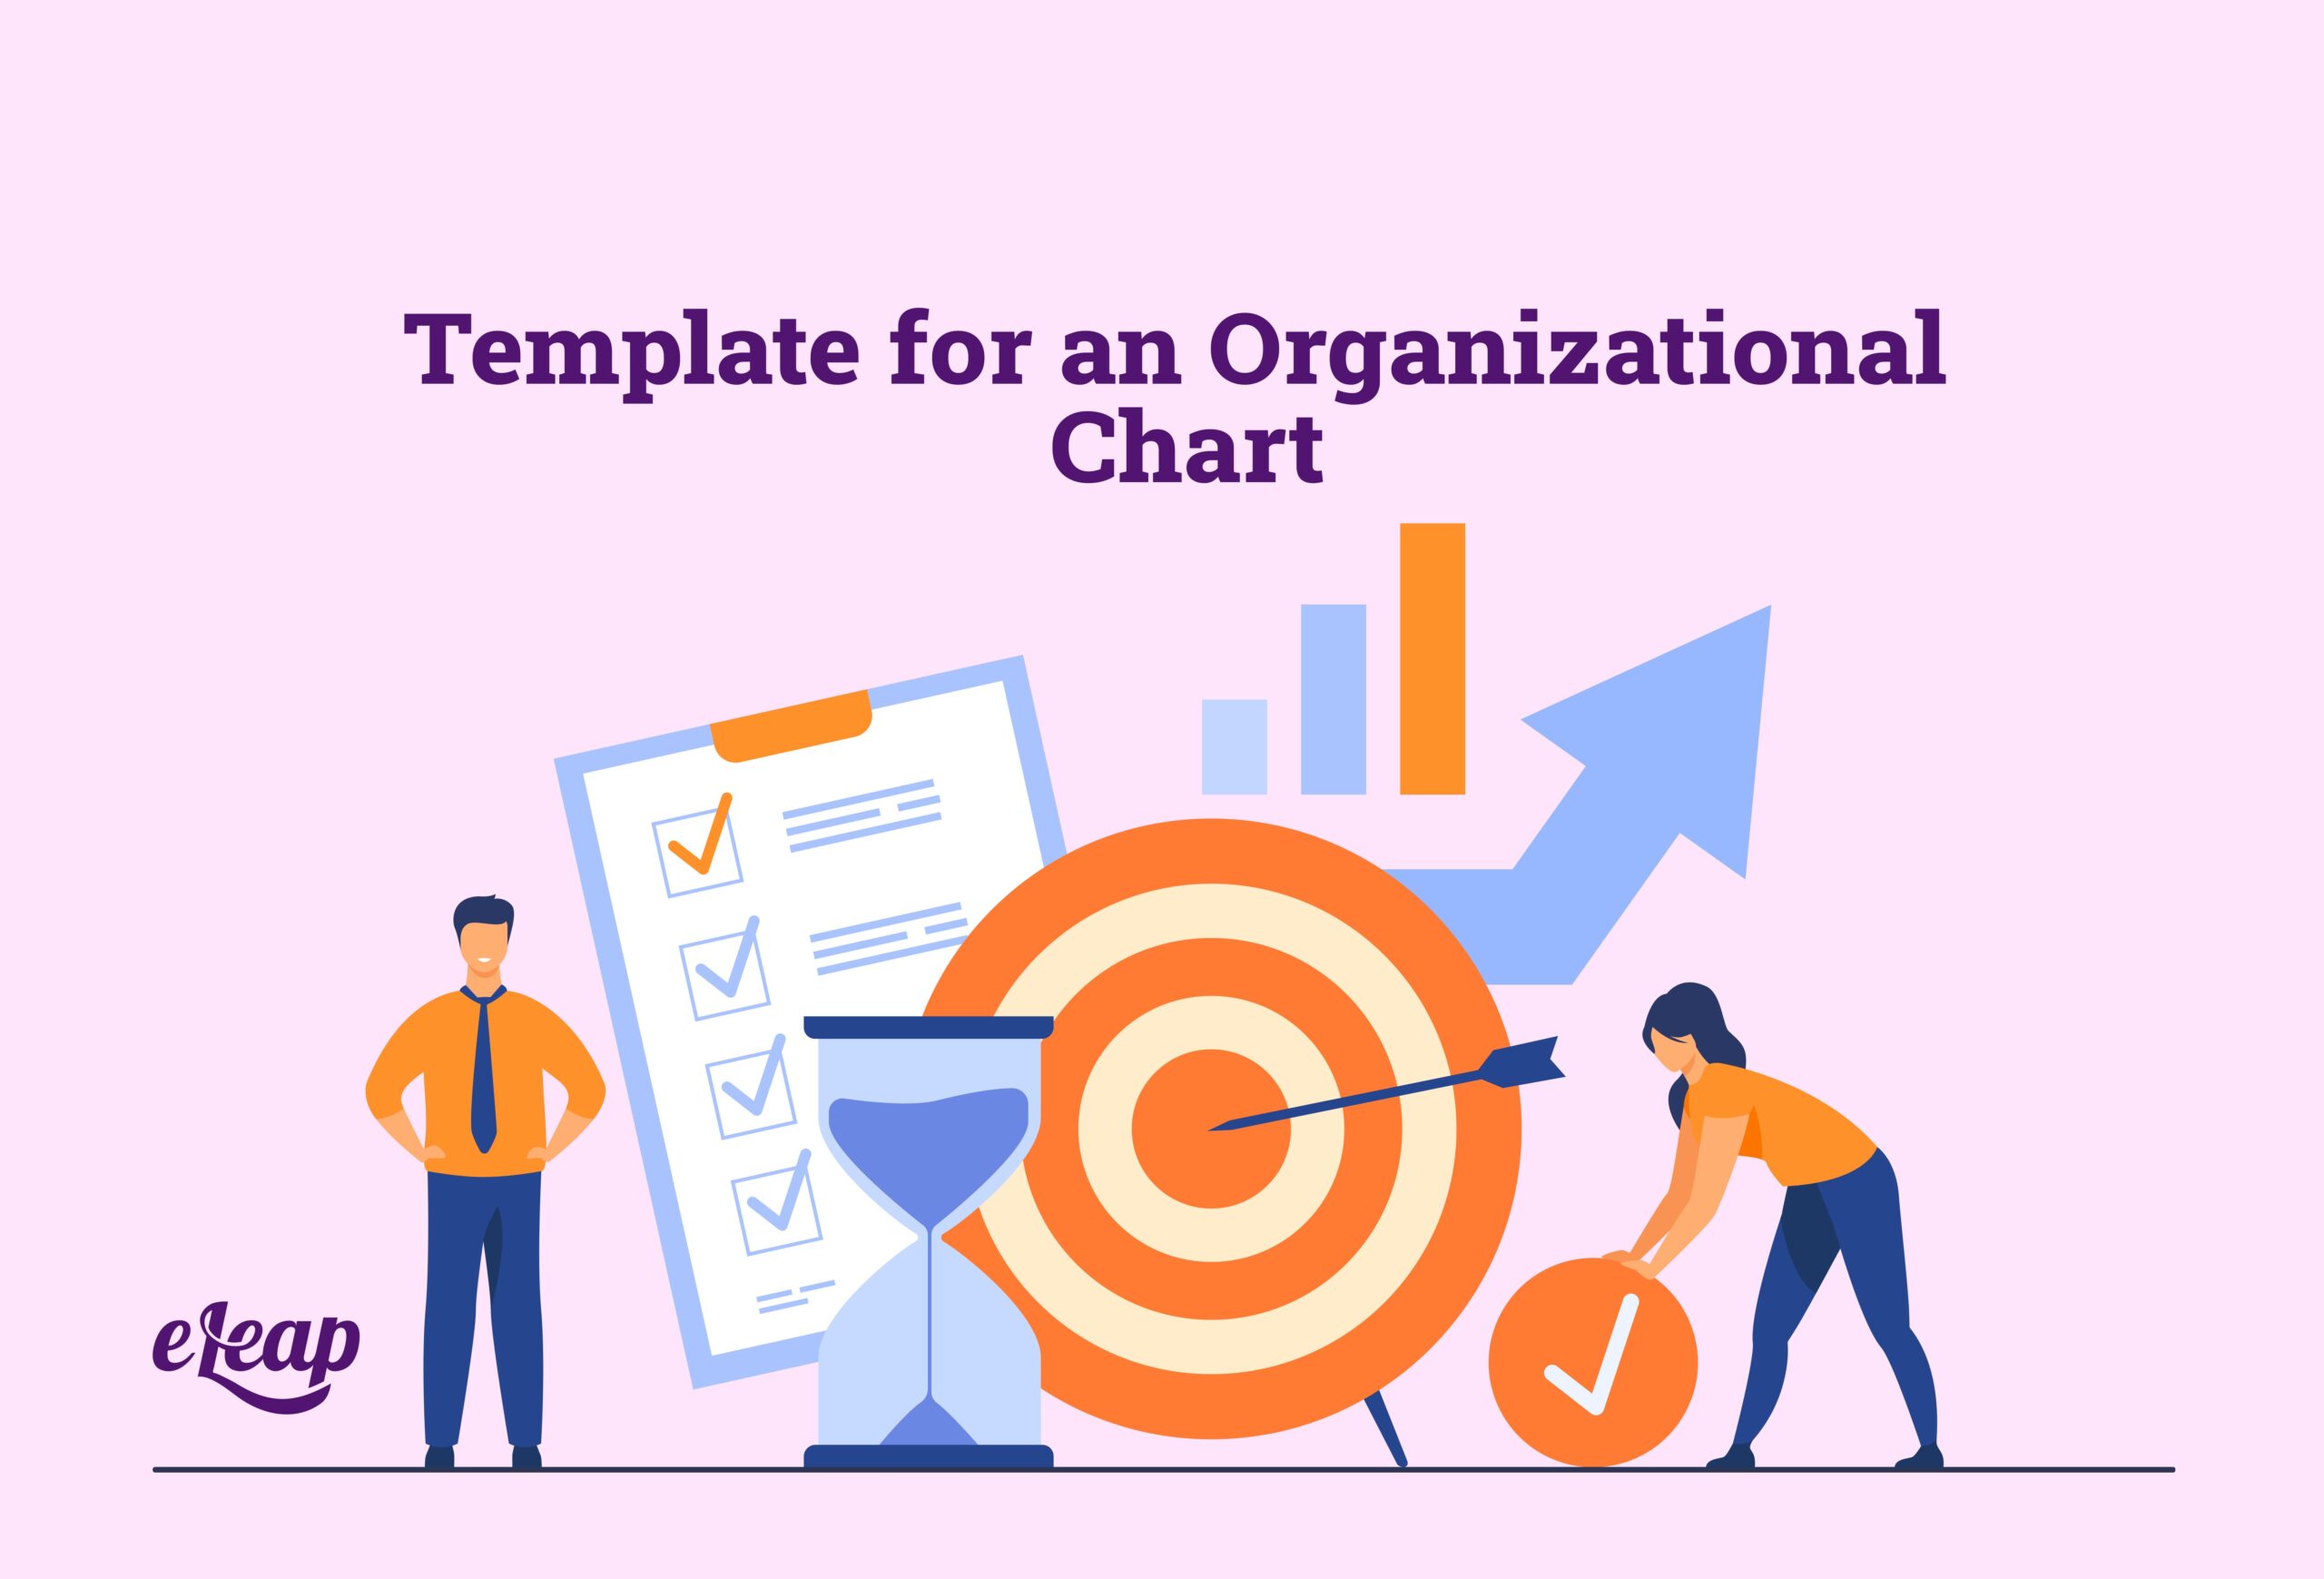 reasons-and-choices-for-organizational-chart-templates